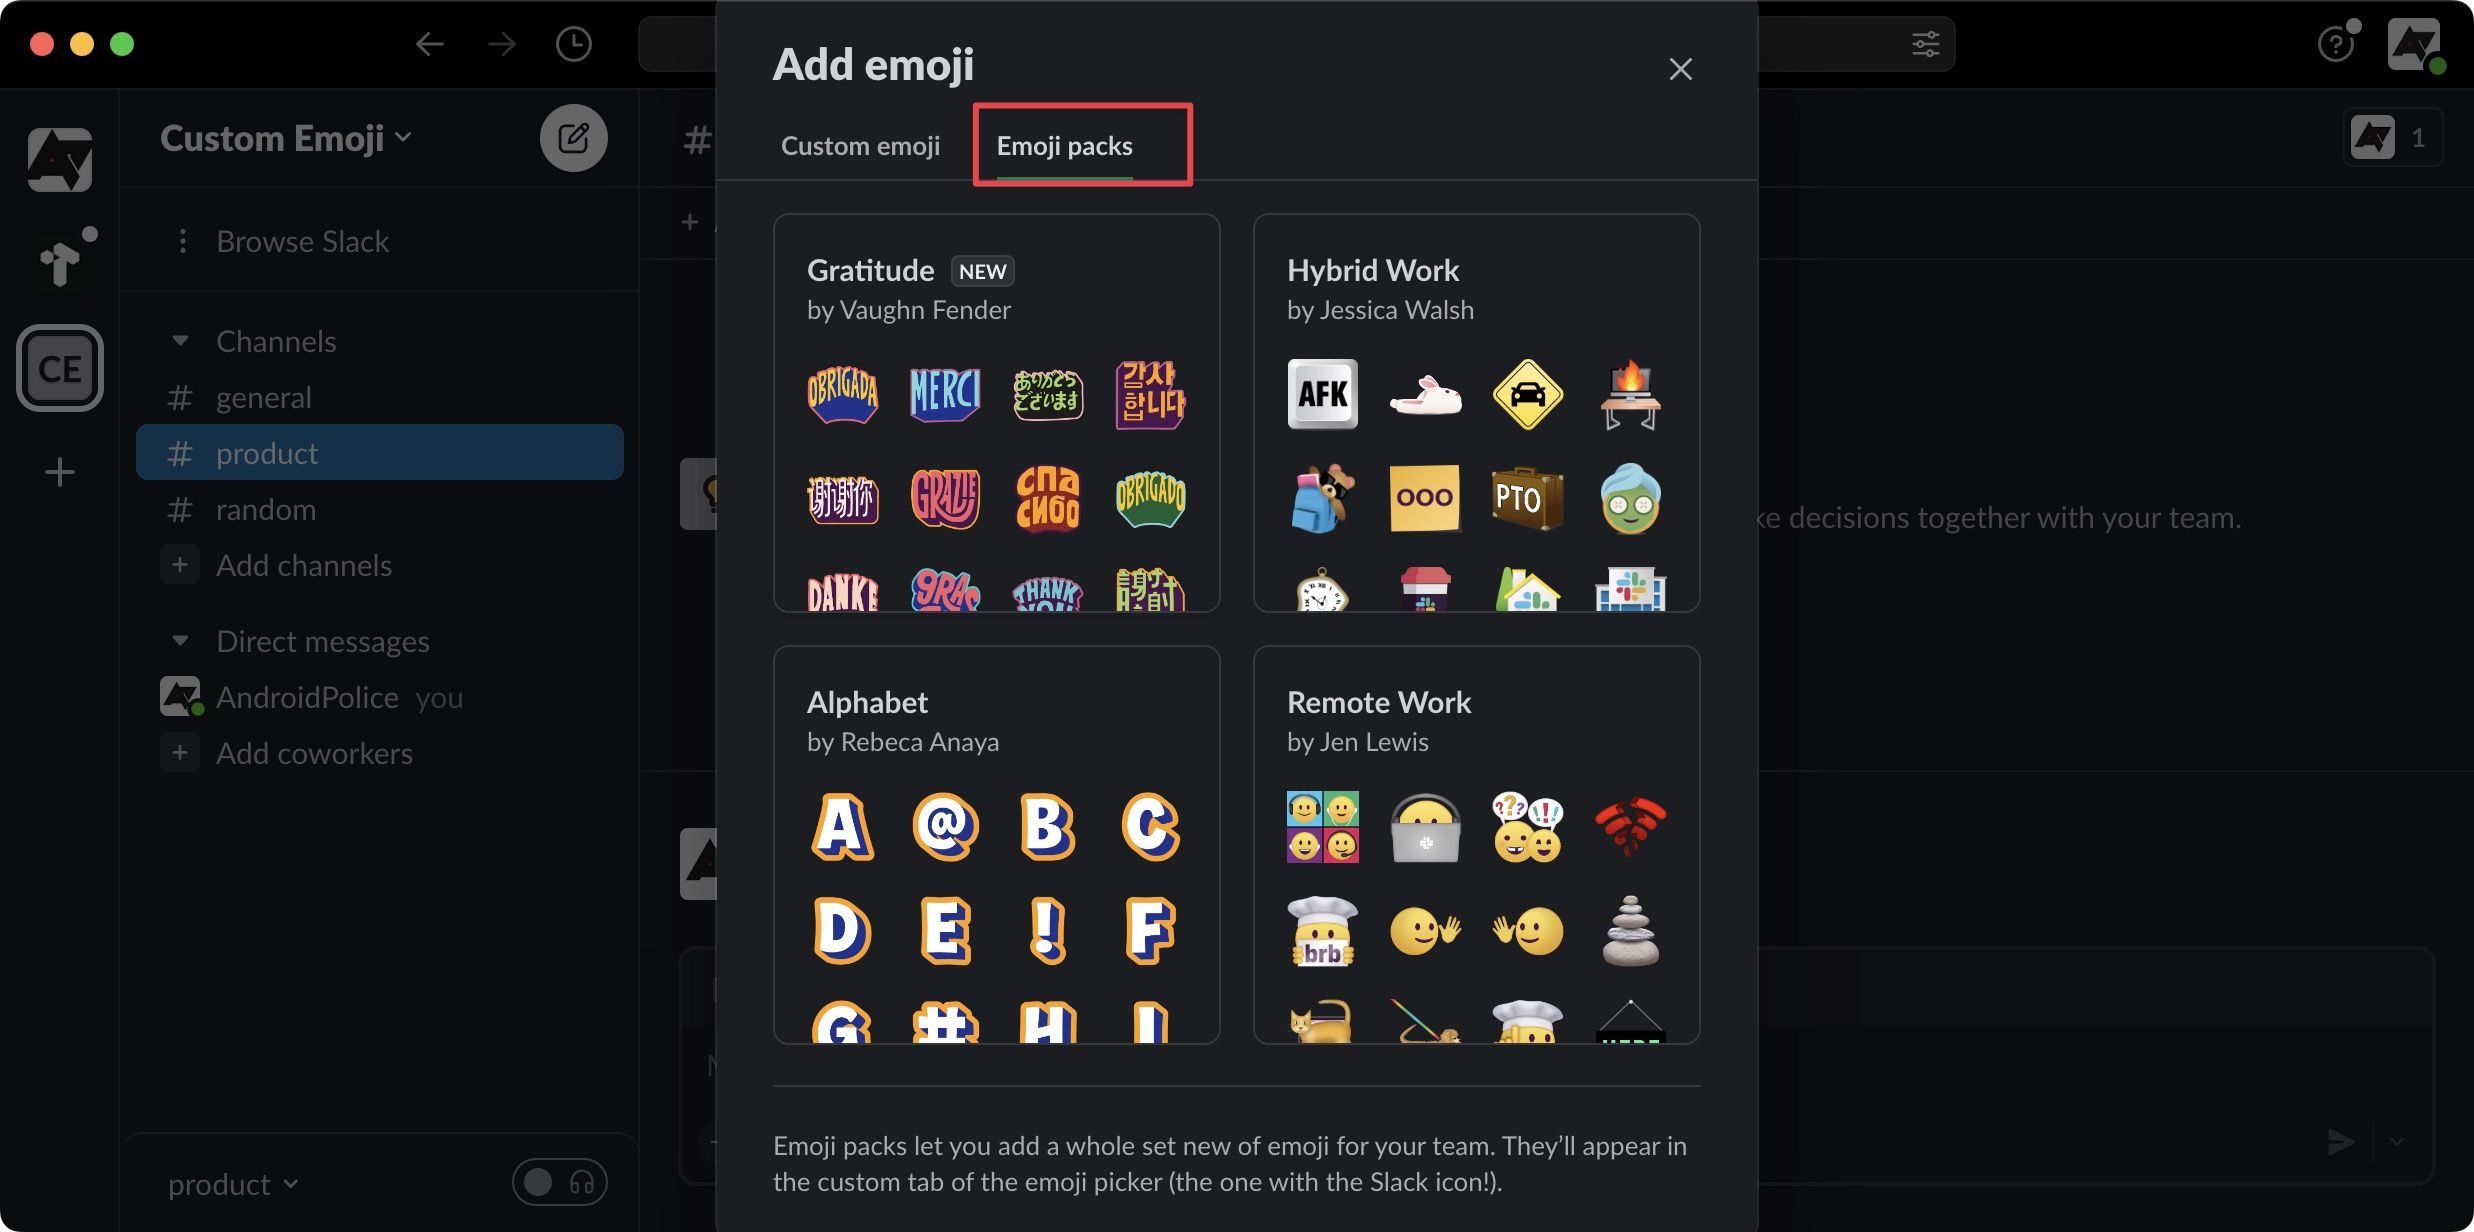 A screenshot of Slack's 'Add Emoji' window, with the emoji pack tab highlighted in red to emphasize its importance or selection.